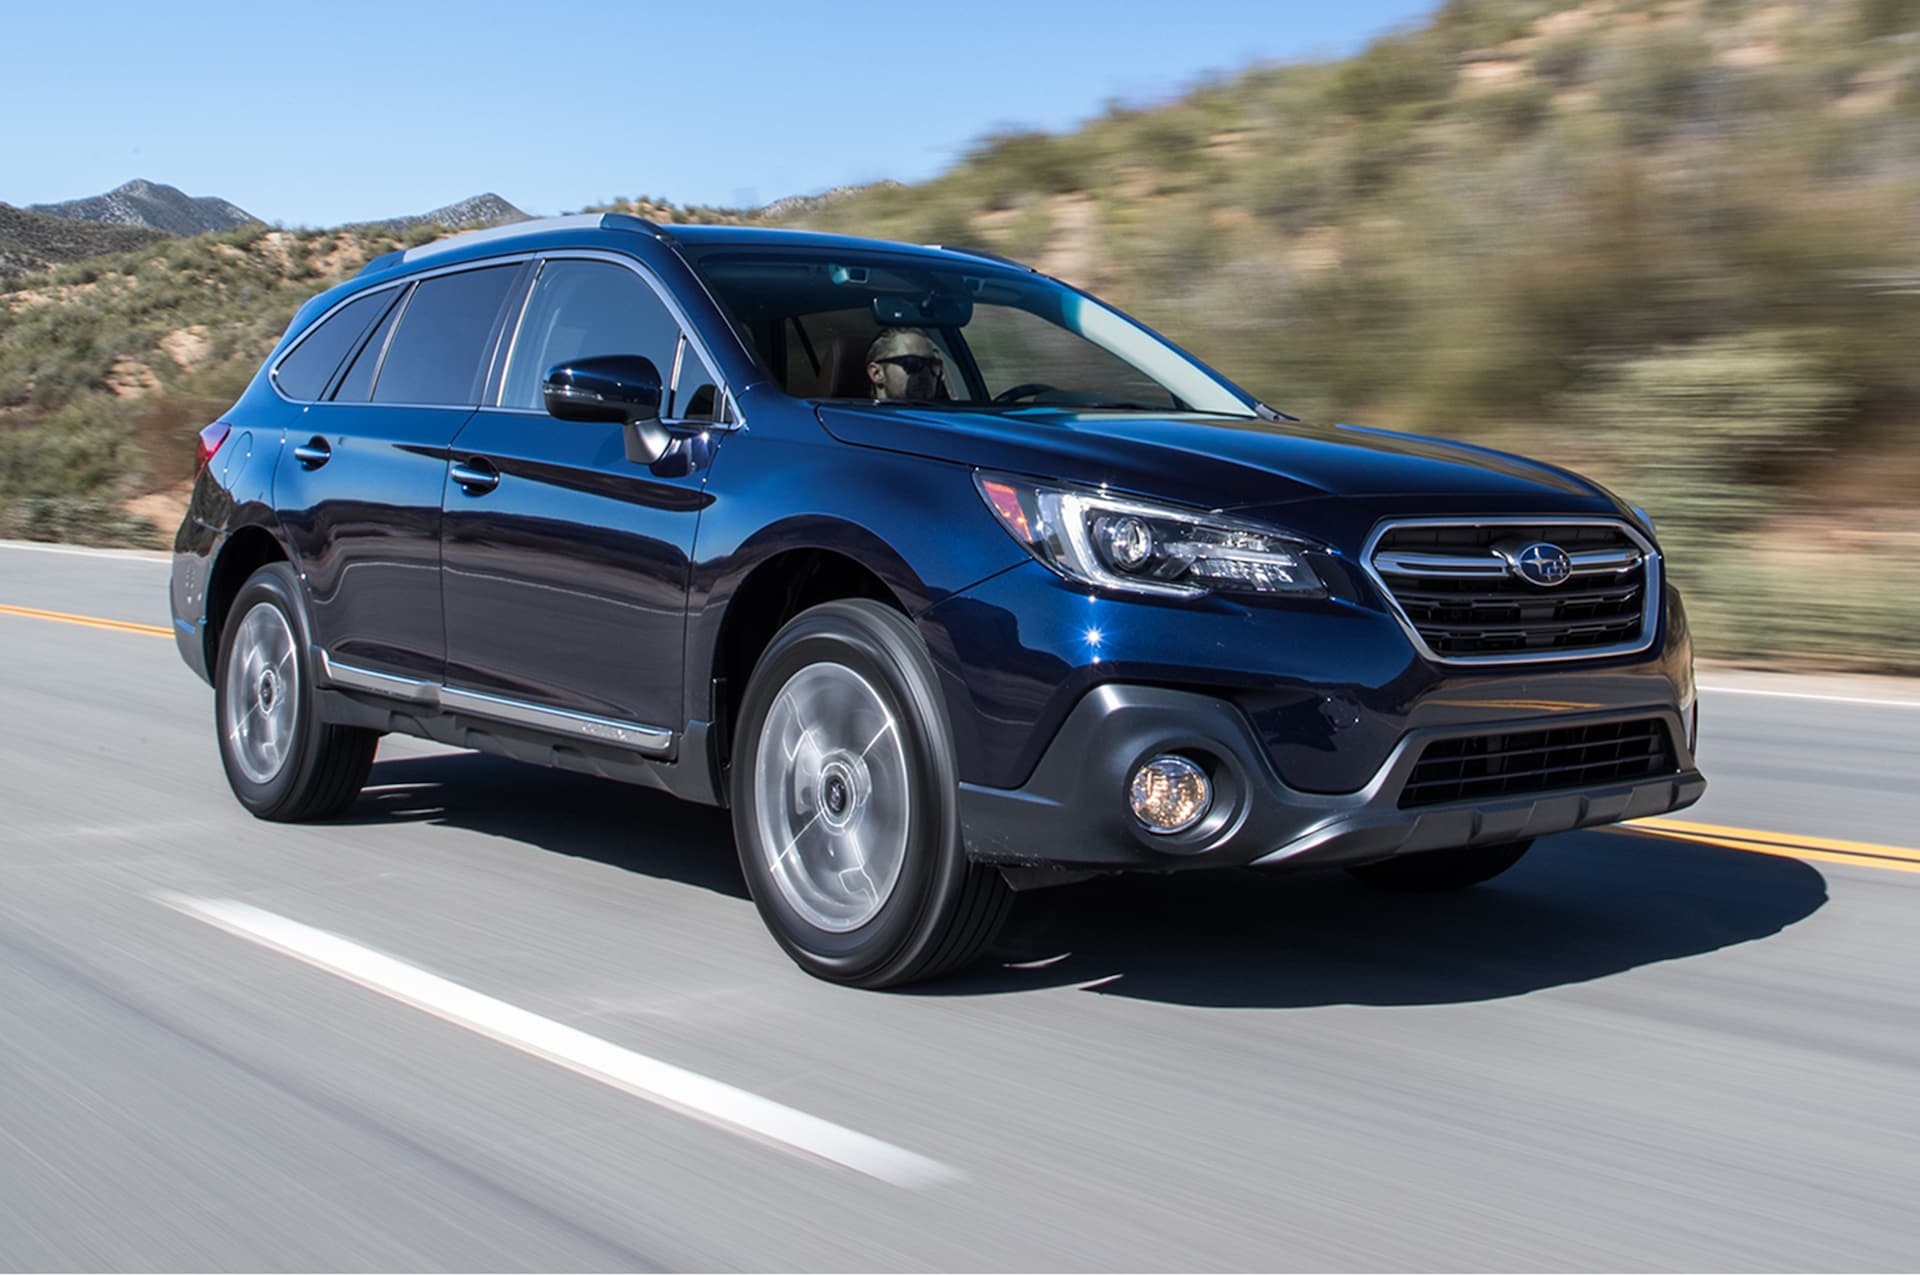 2018 Subaru Outback 3.6R First Test: The More Powerful Multi-Purpose Wagon